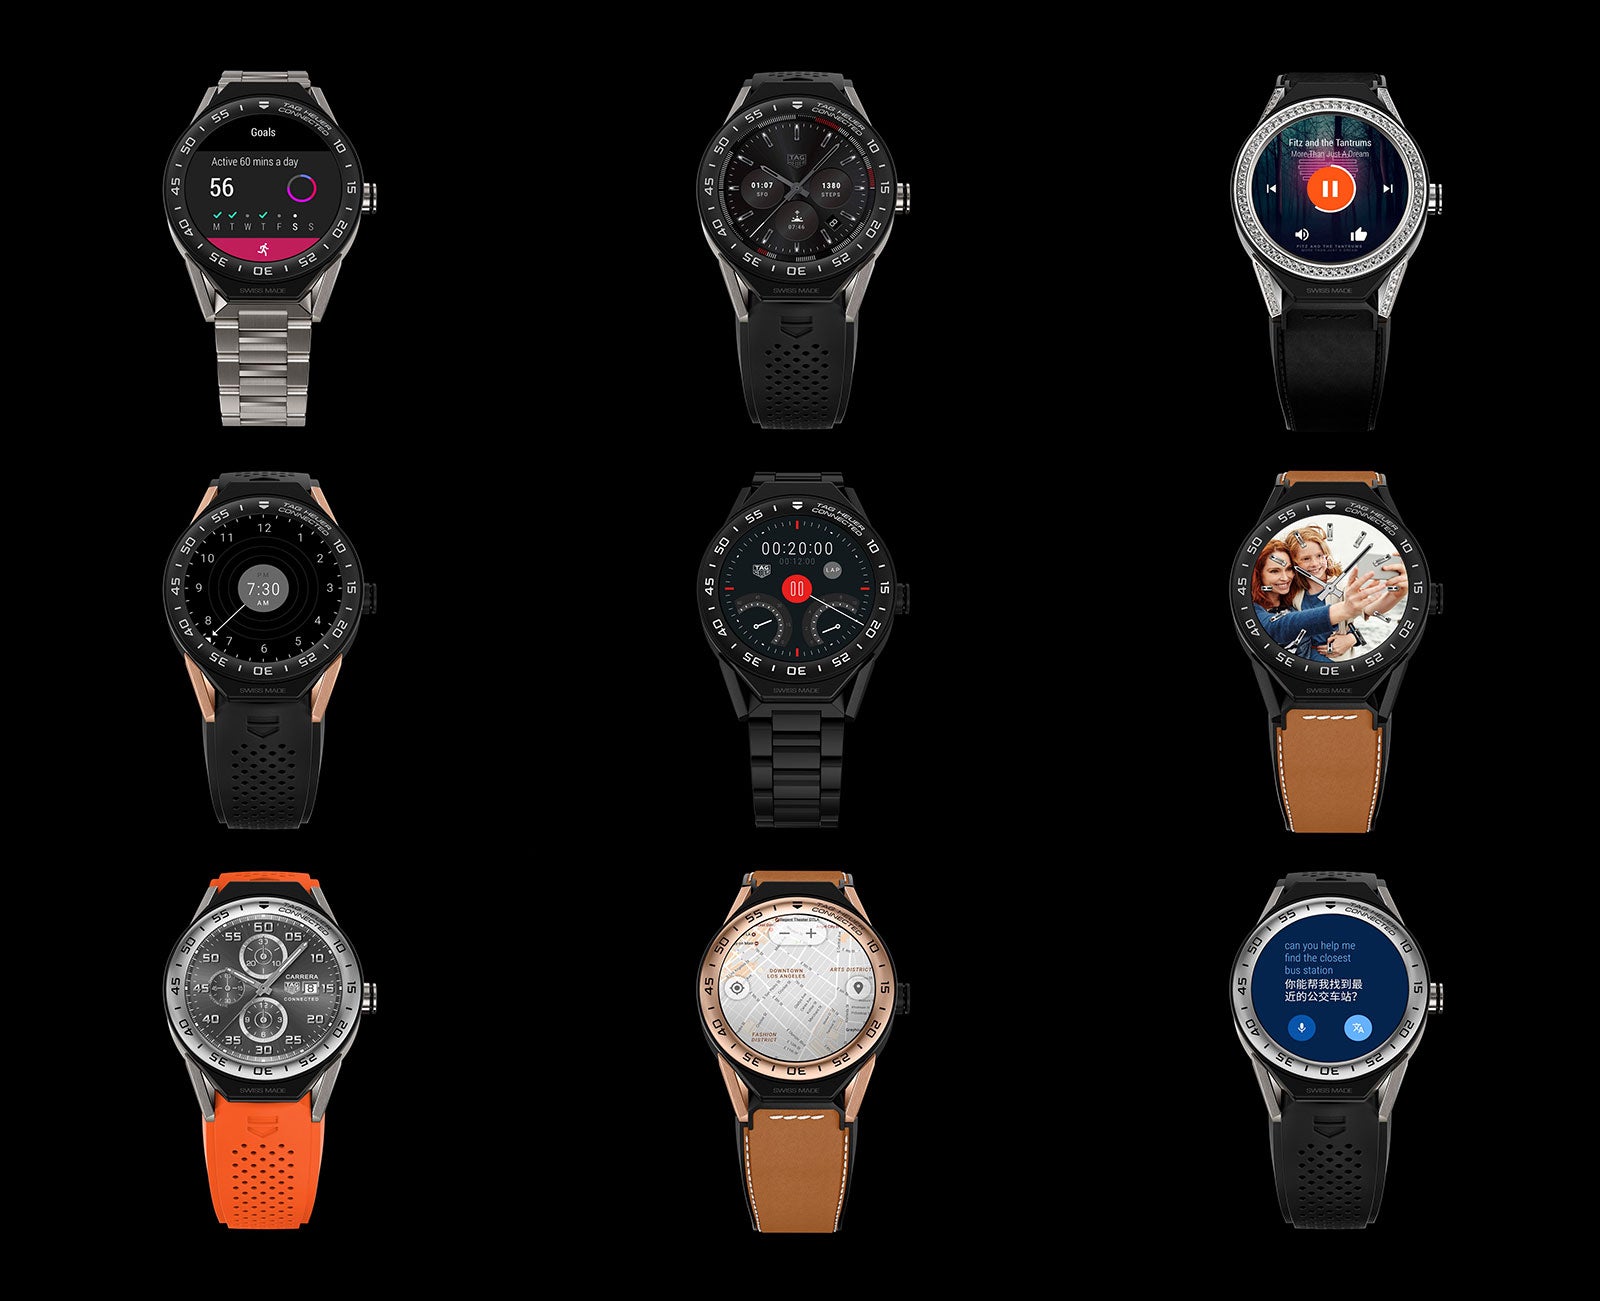 TAGHeuer among big brands taking on the smartwatch sector